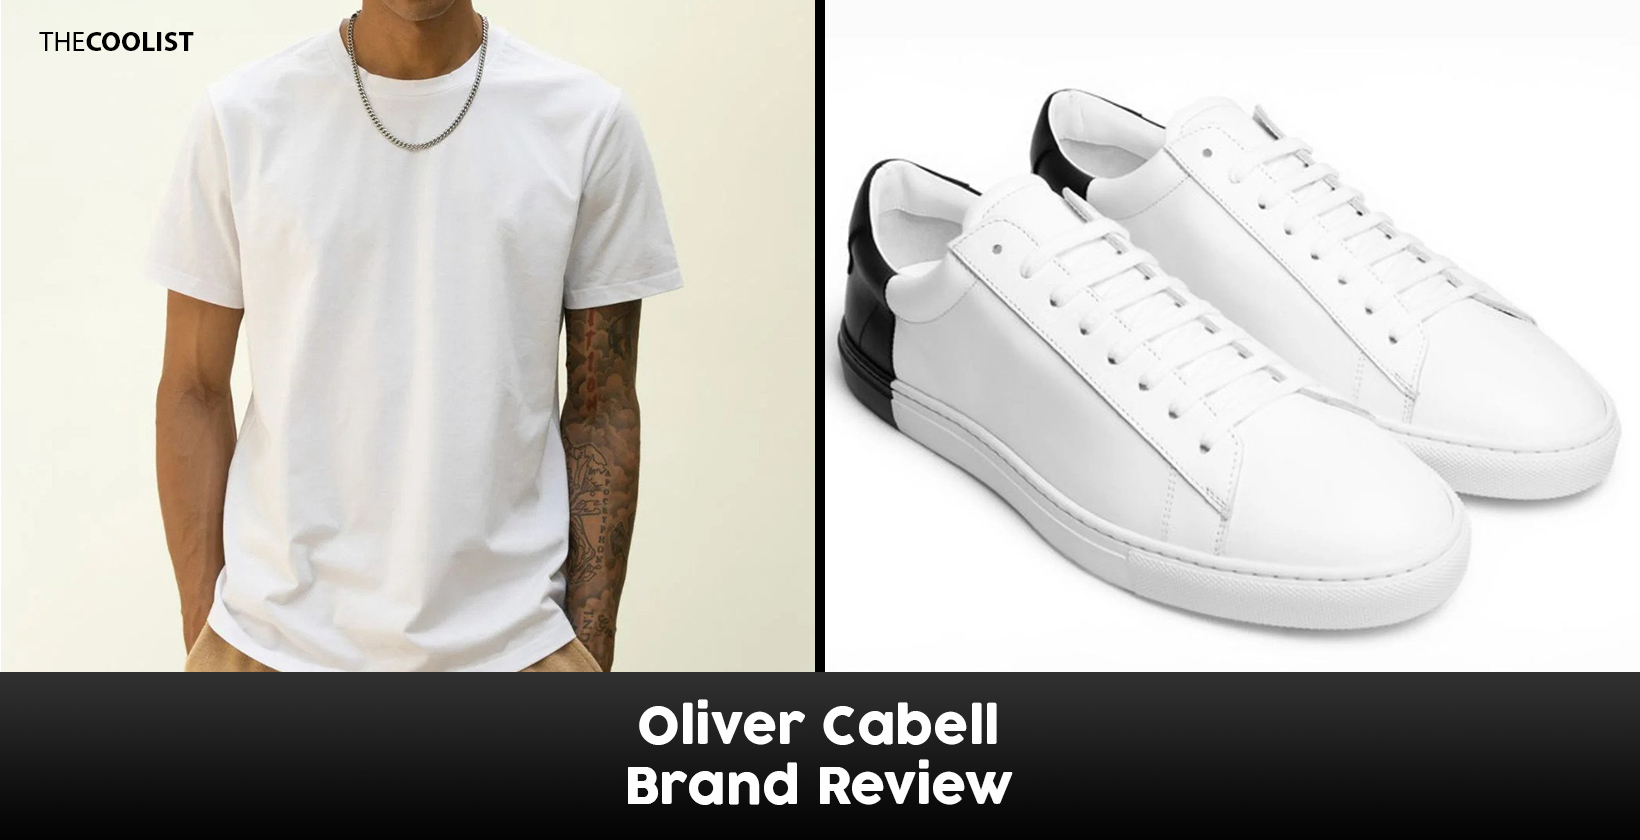 Review of Oliver Cabell